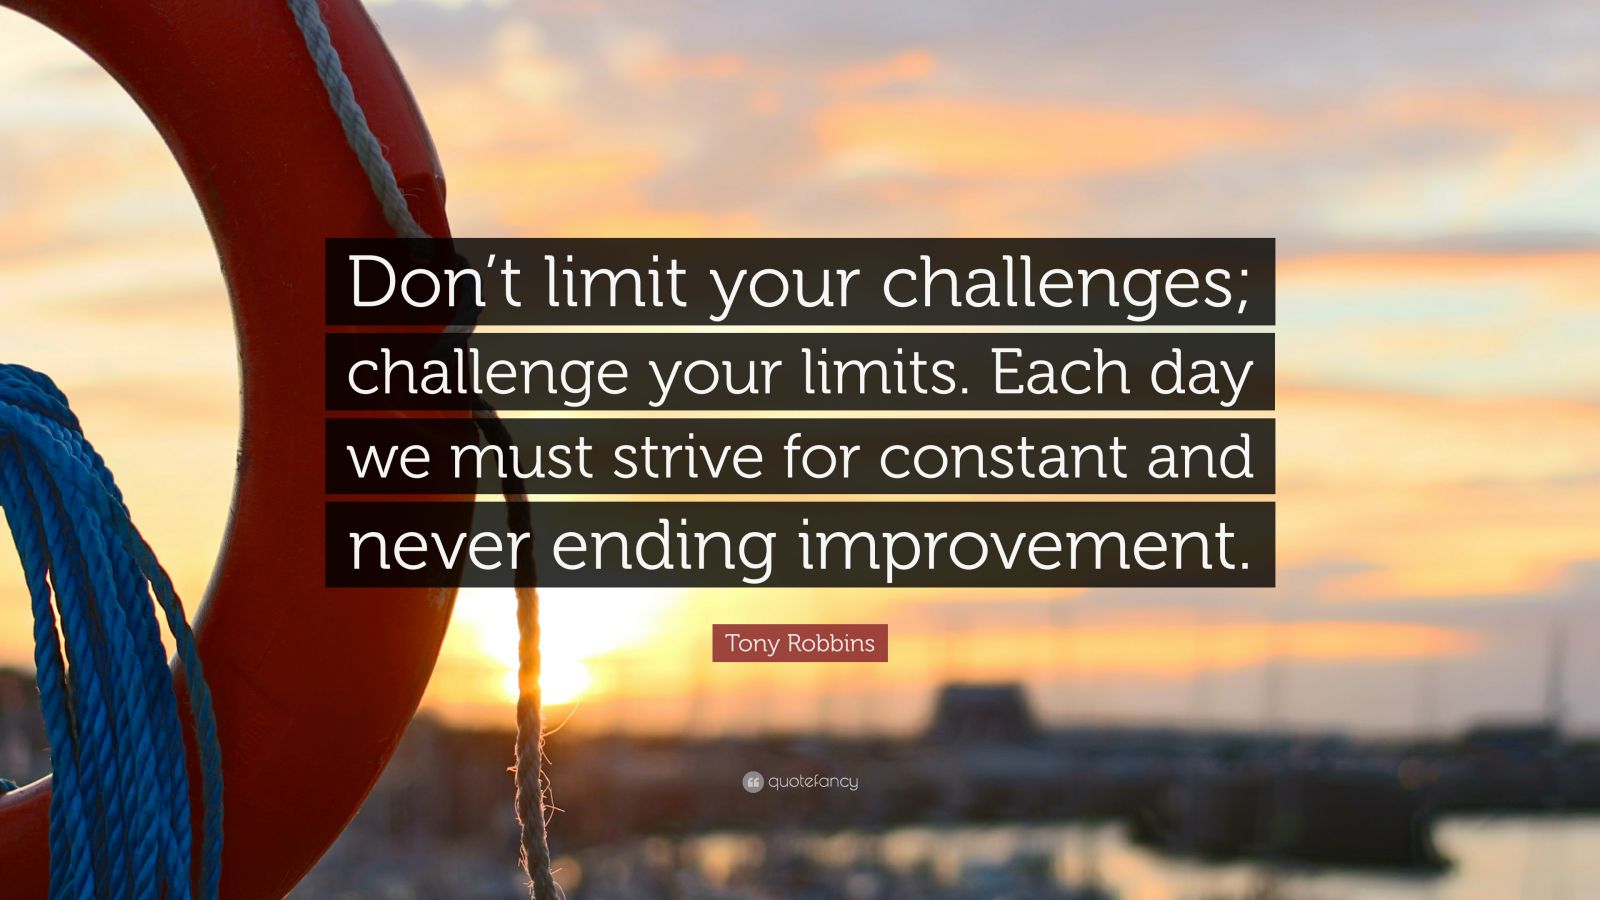 Tony Robbins Quote: “Don’t limit your challenges; challenge your limits